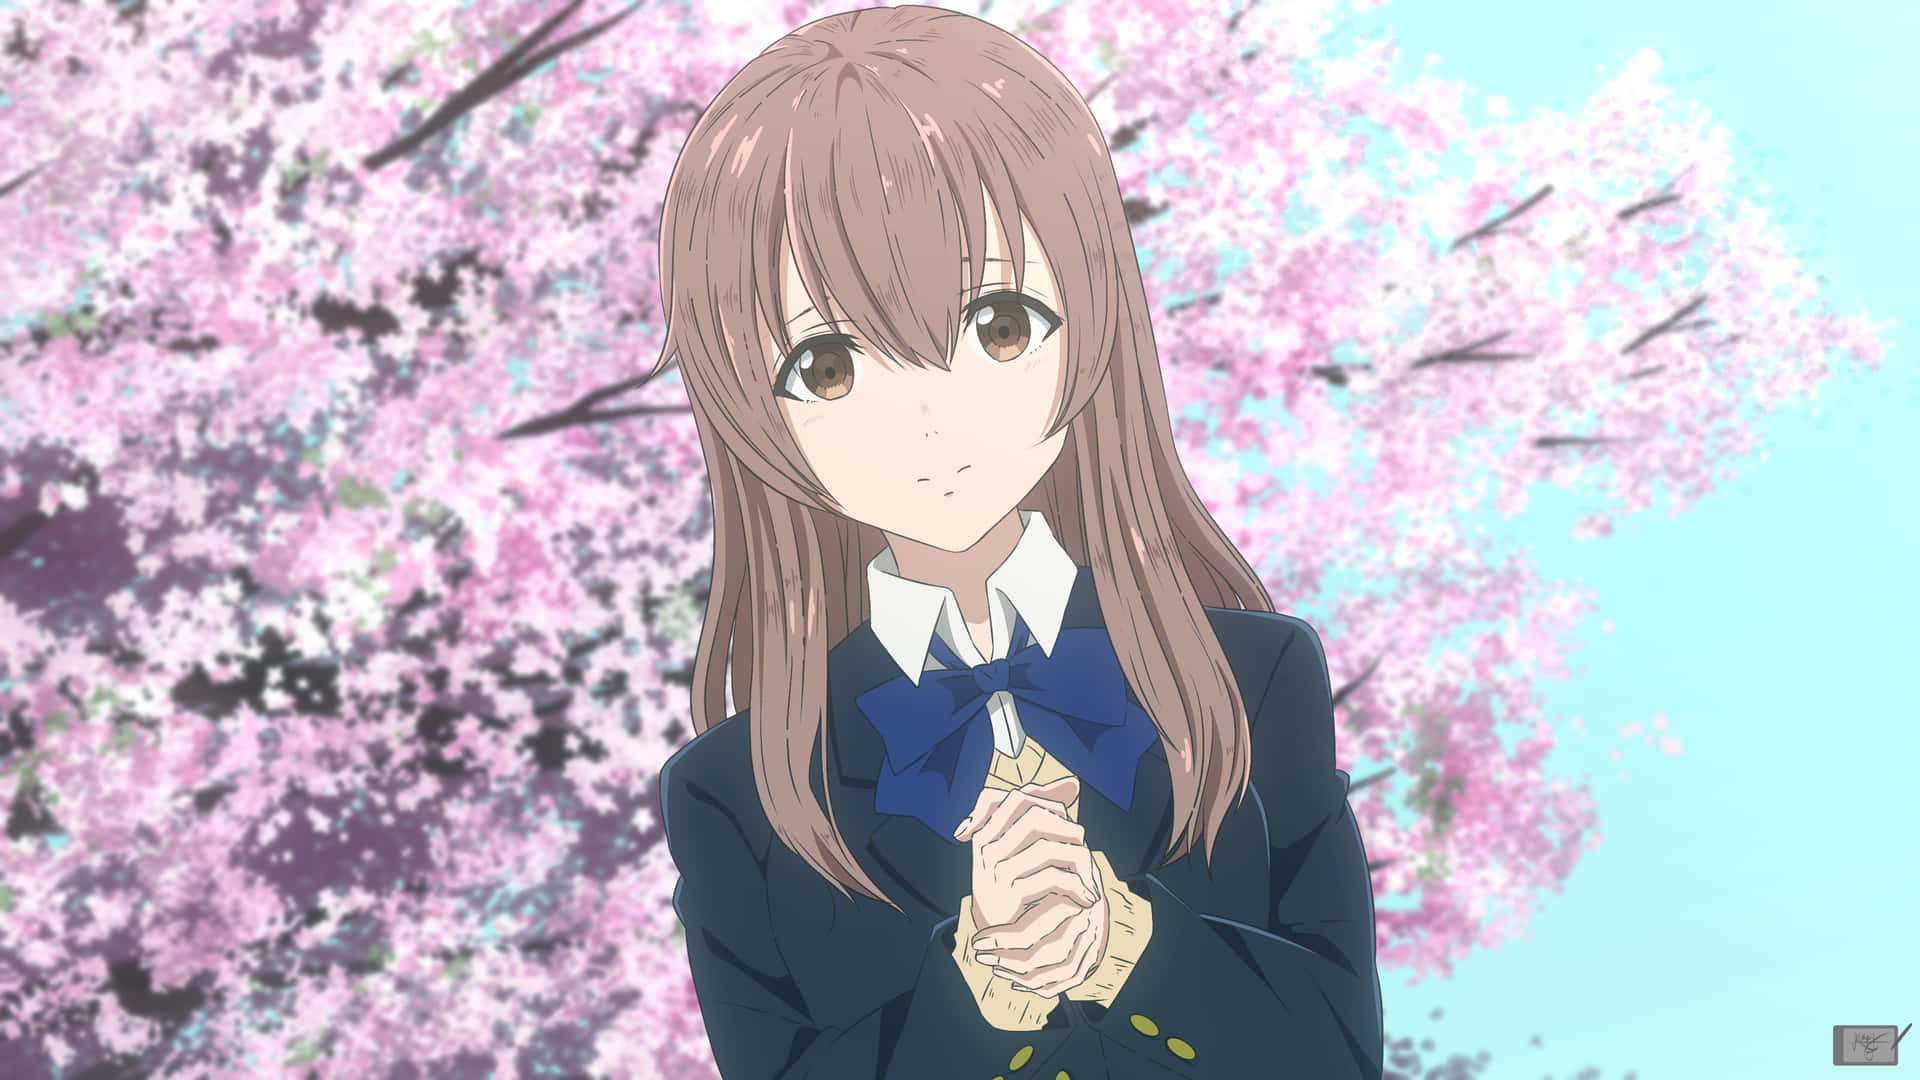 Follow Shoko as she embarks on a journey of redemption in the heartwarming animation, A Silent Voice.